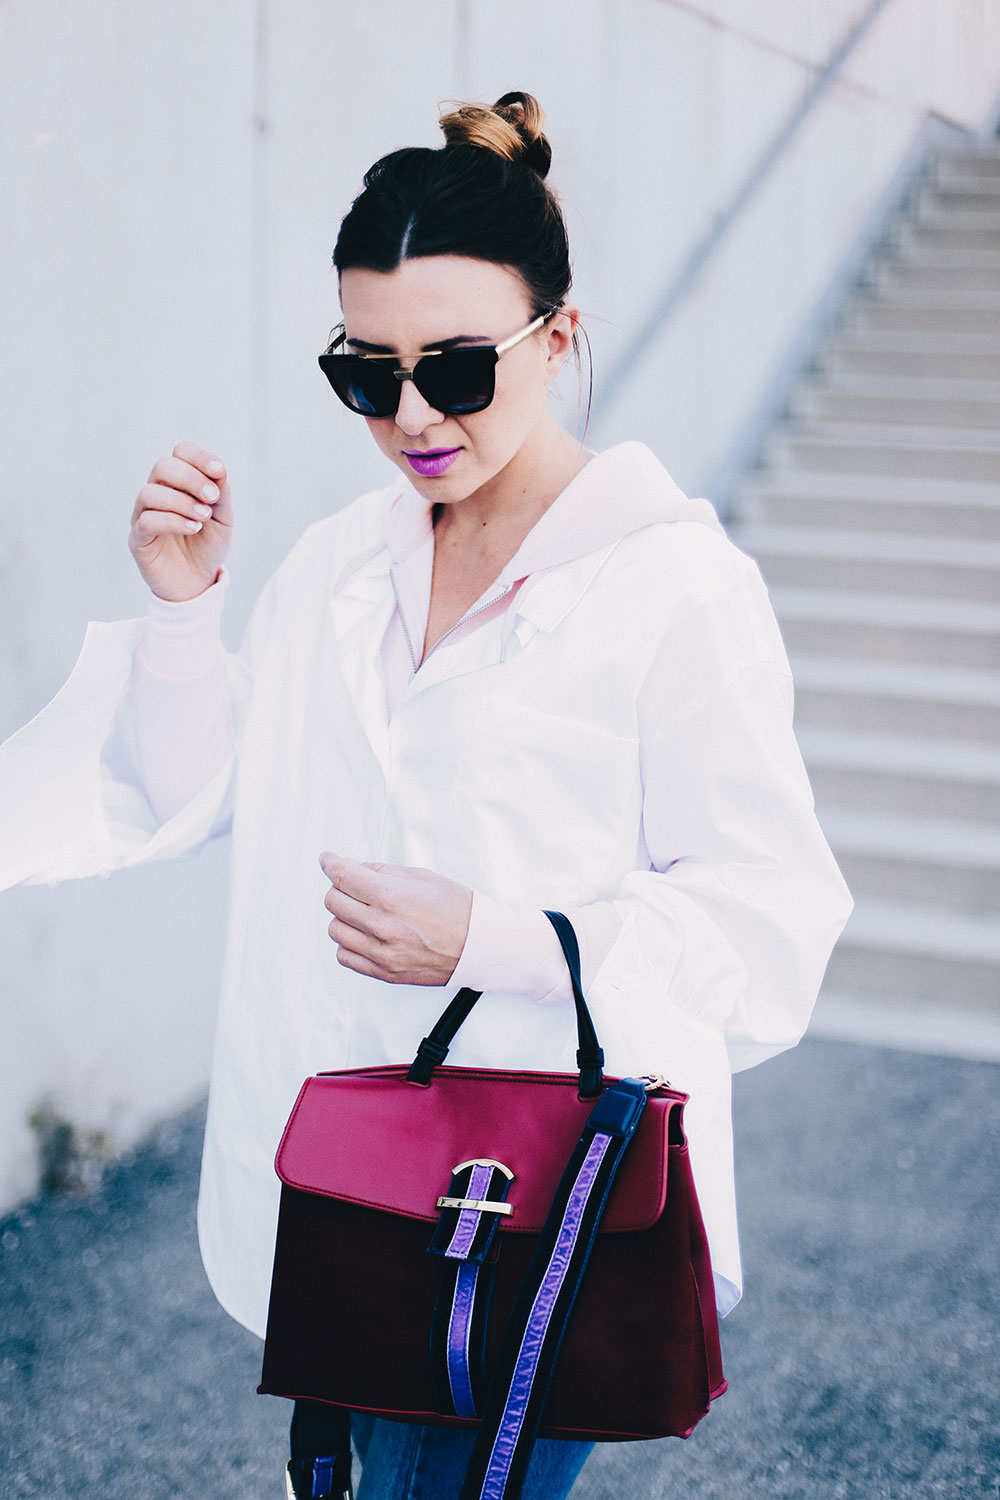 Herbst-Outfit Idee, Weiße Oversize-Bluse über rosa Sweatjacke, Streetstyle, Outfit Inspiration, Fashion Magazin, Fashion Blogger, Mode Blog, whoismocca.com